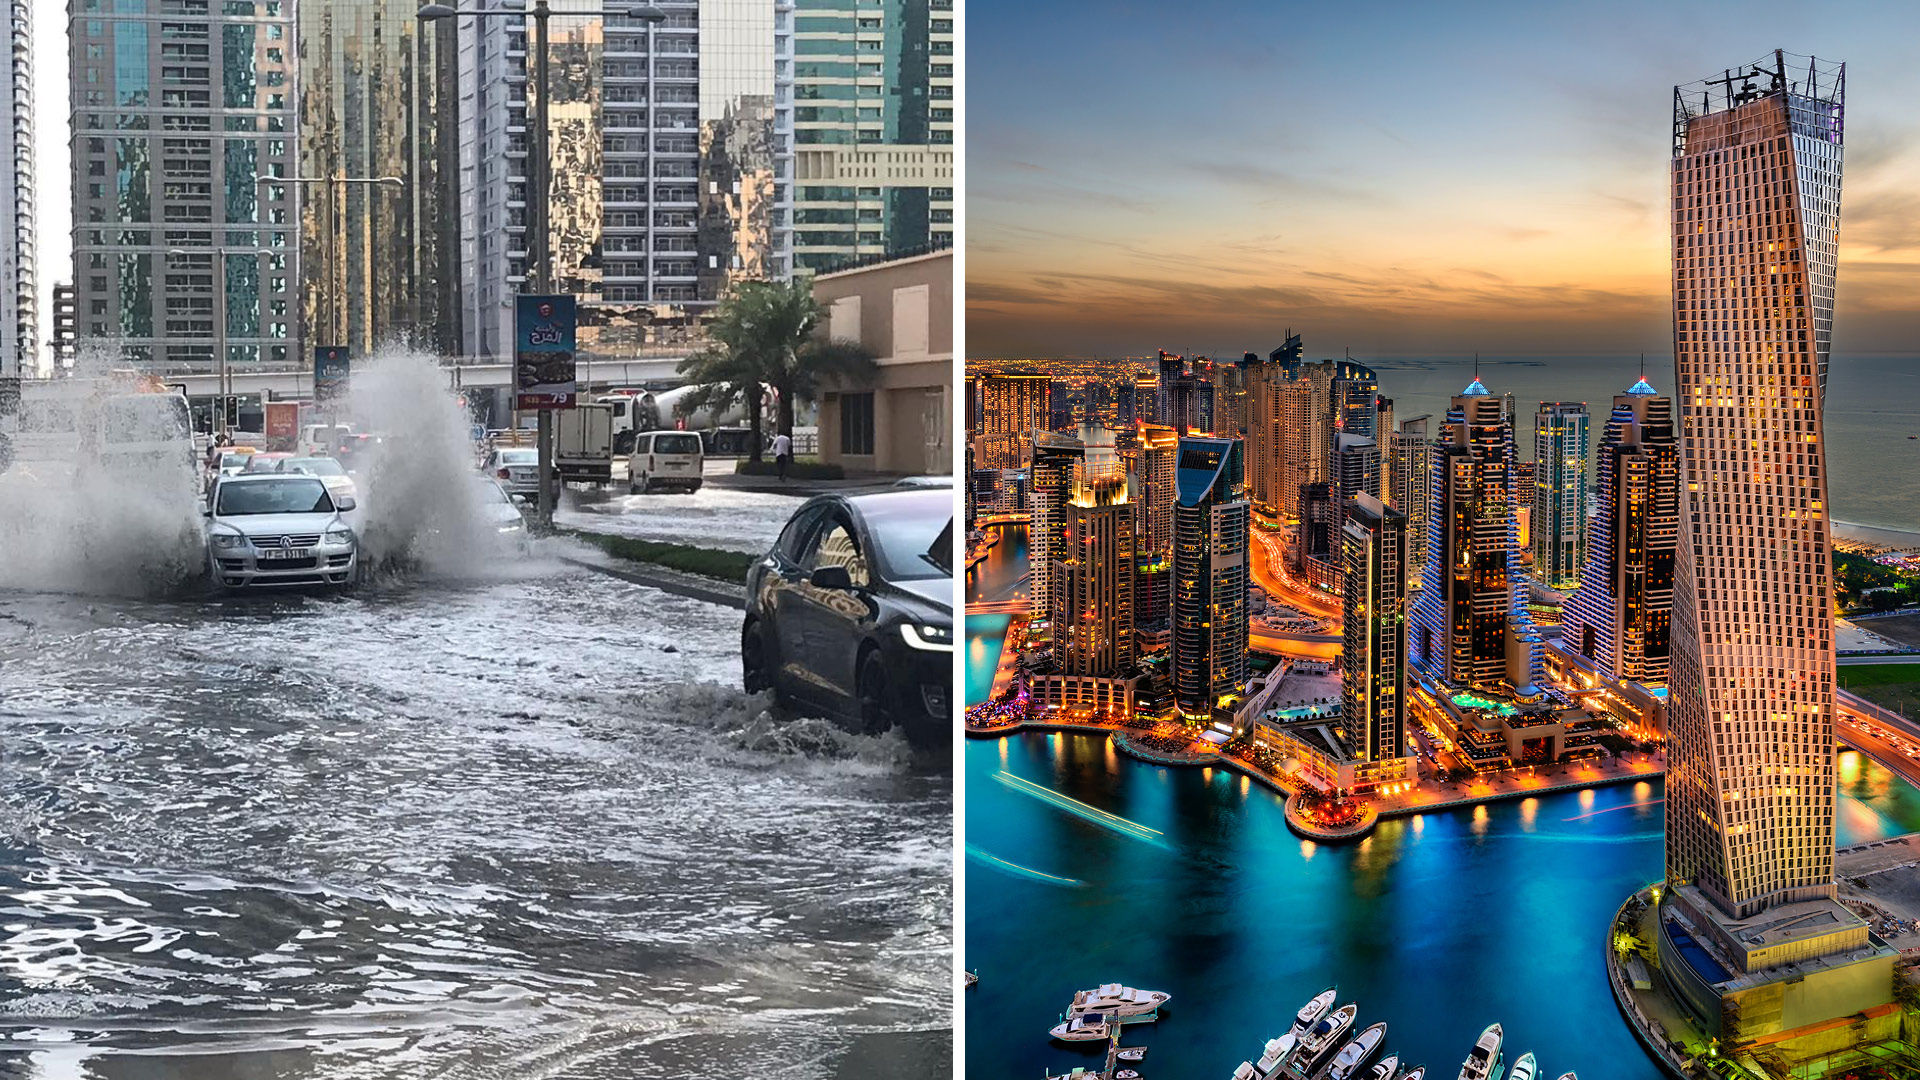 Floods In Dubai! Where Is The World Heading, Thanks to Climate Change?